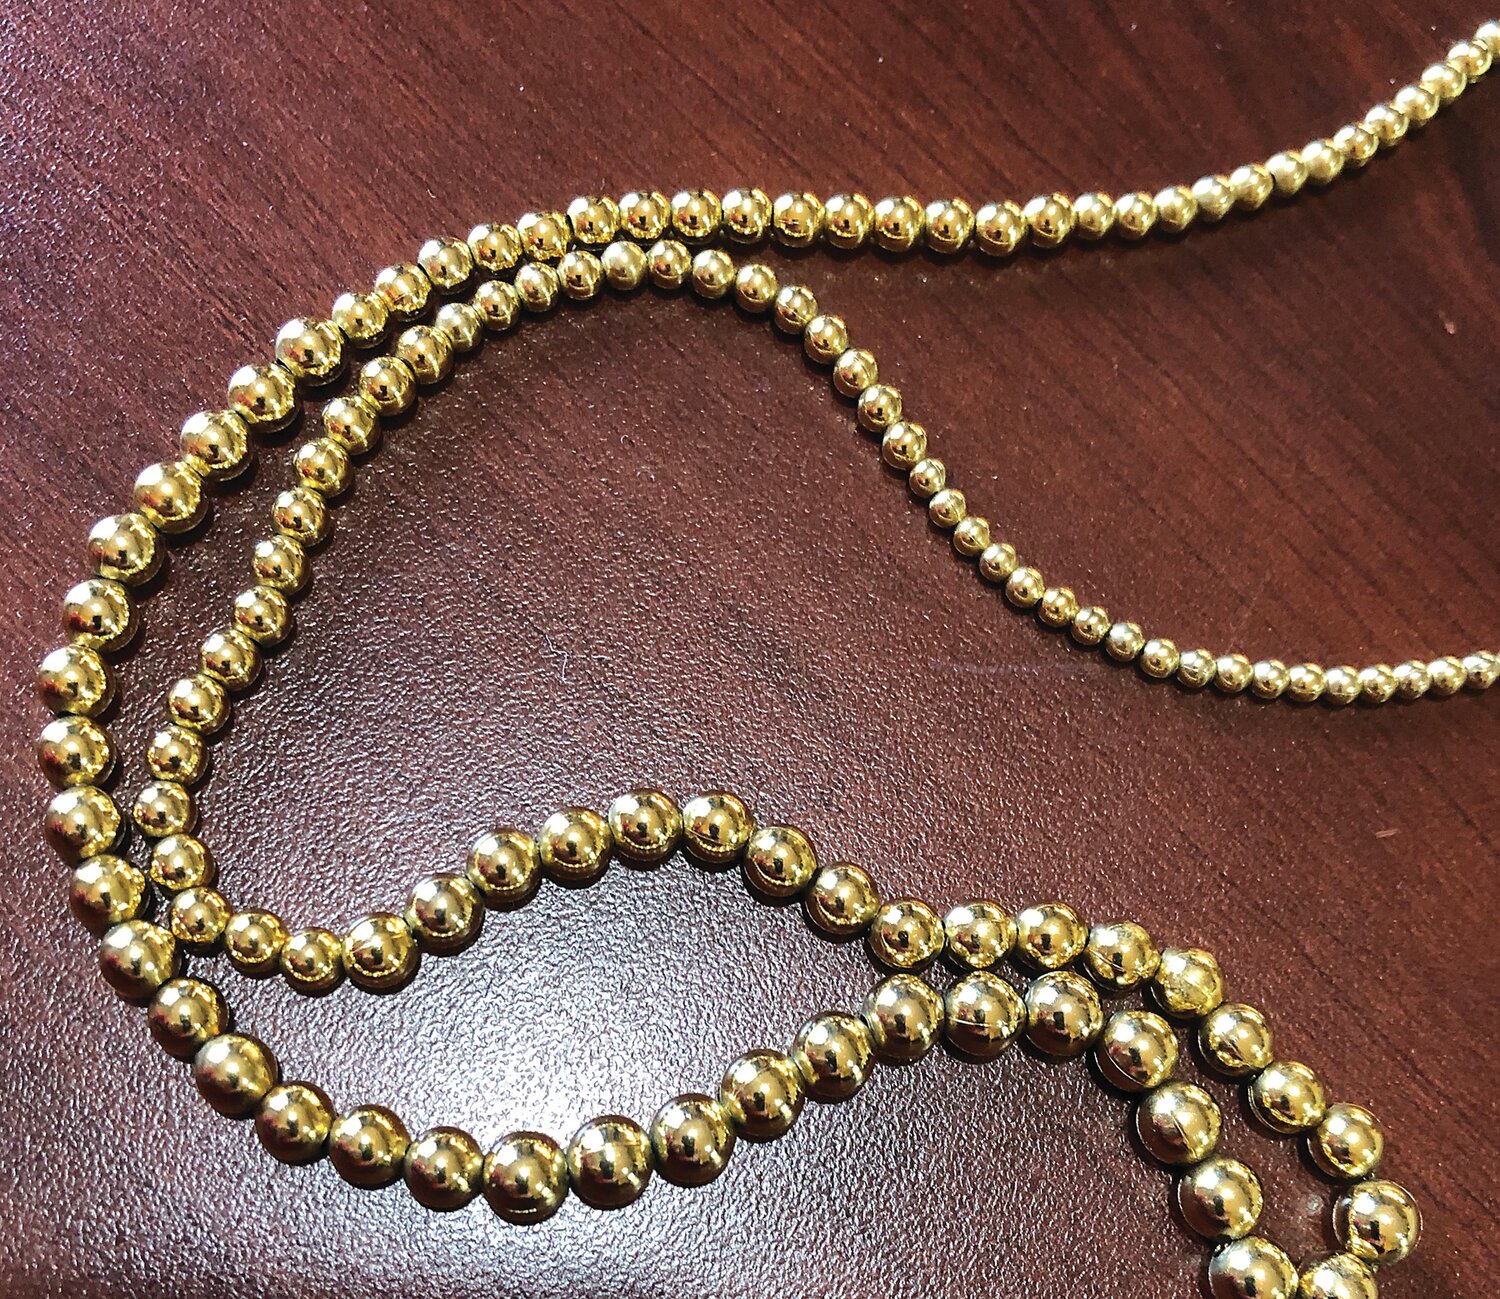 An add-a-bead gold necklace.